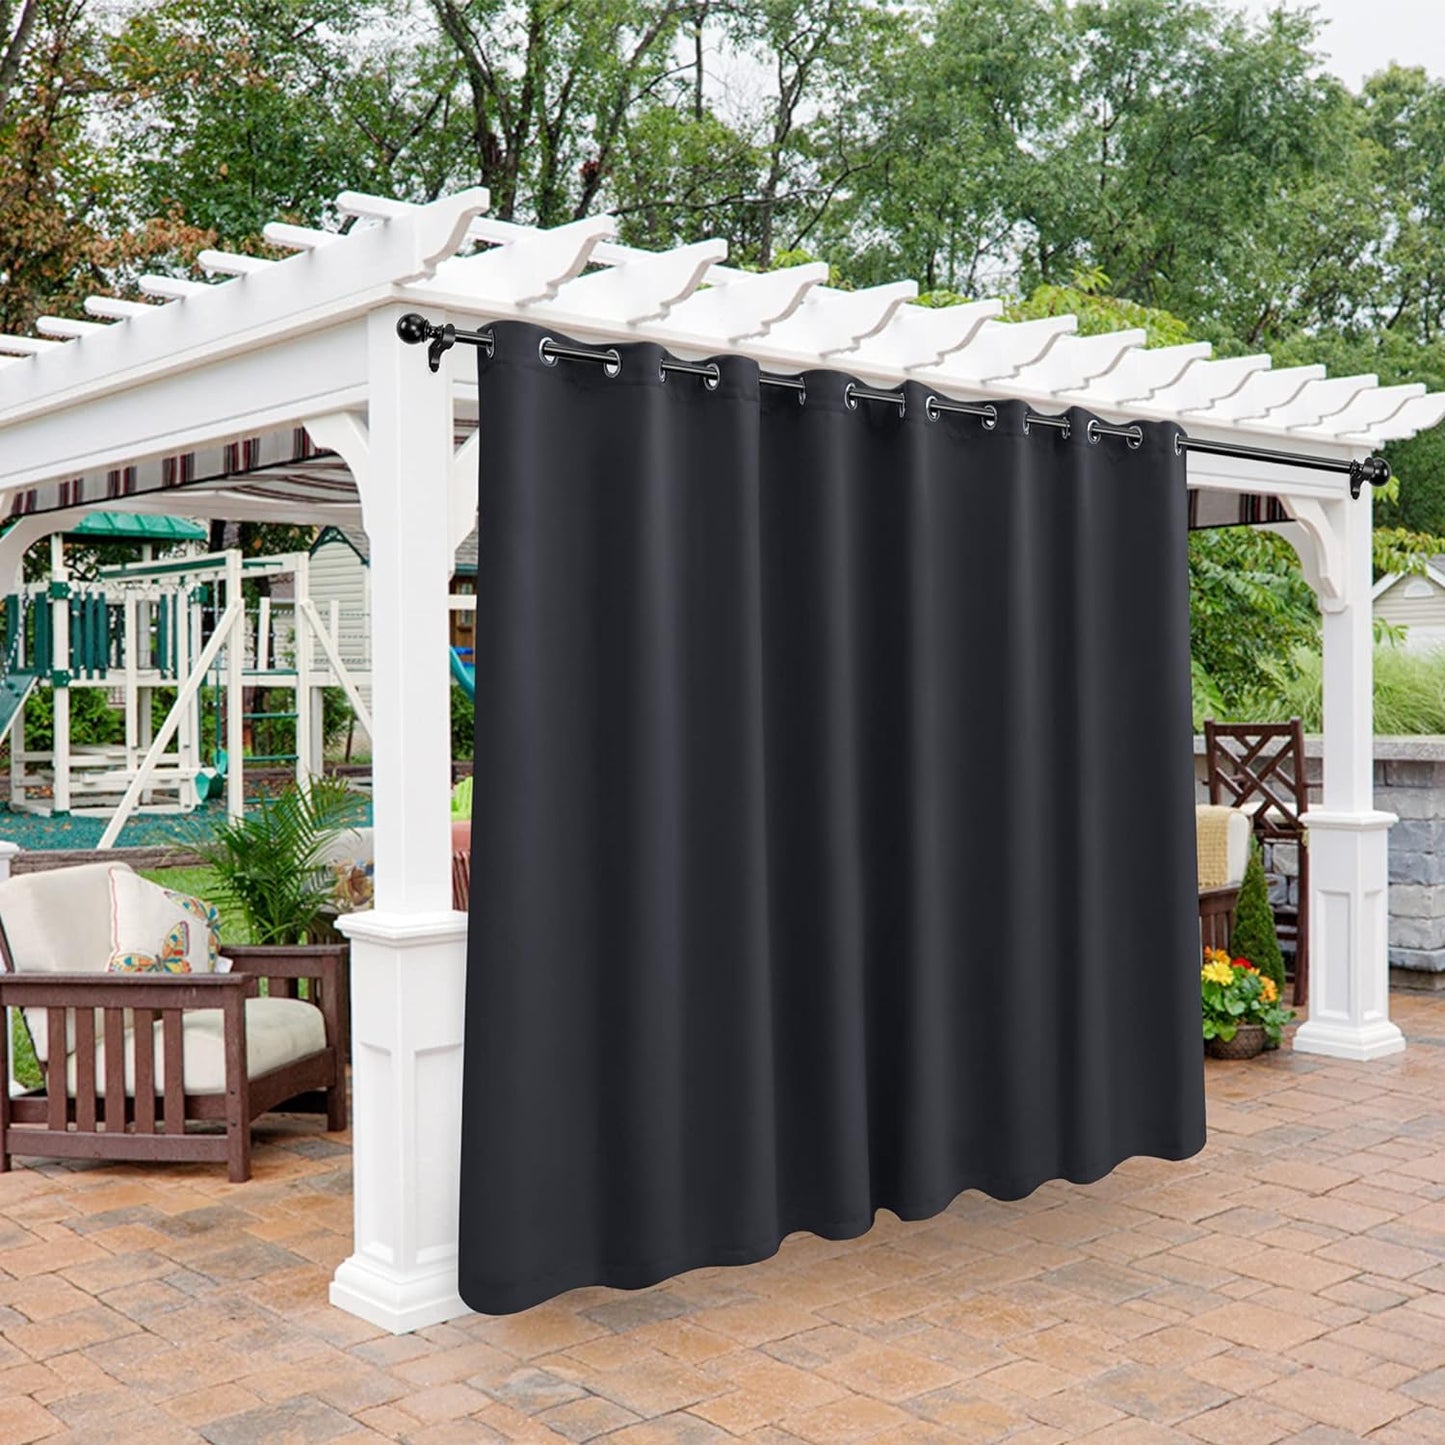 BONZER Outdoor Curtains for Patio Waterproof - Light Blocking Weather Resistant Privacy Grommet Blackout Curtains for Gazebo, Porch, Pergola, Cabana, Deck, Sunroom, 1 Panel, 52W X 84L Inch, Silver  BONZER Dark Grey 120W X 95 Inch 